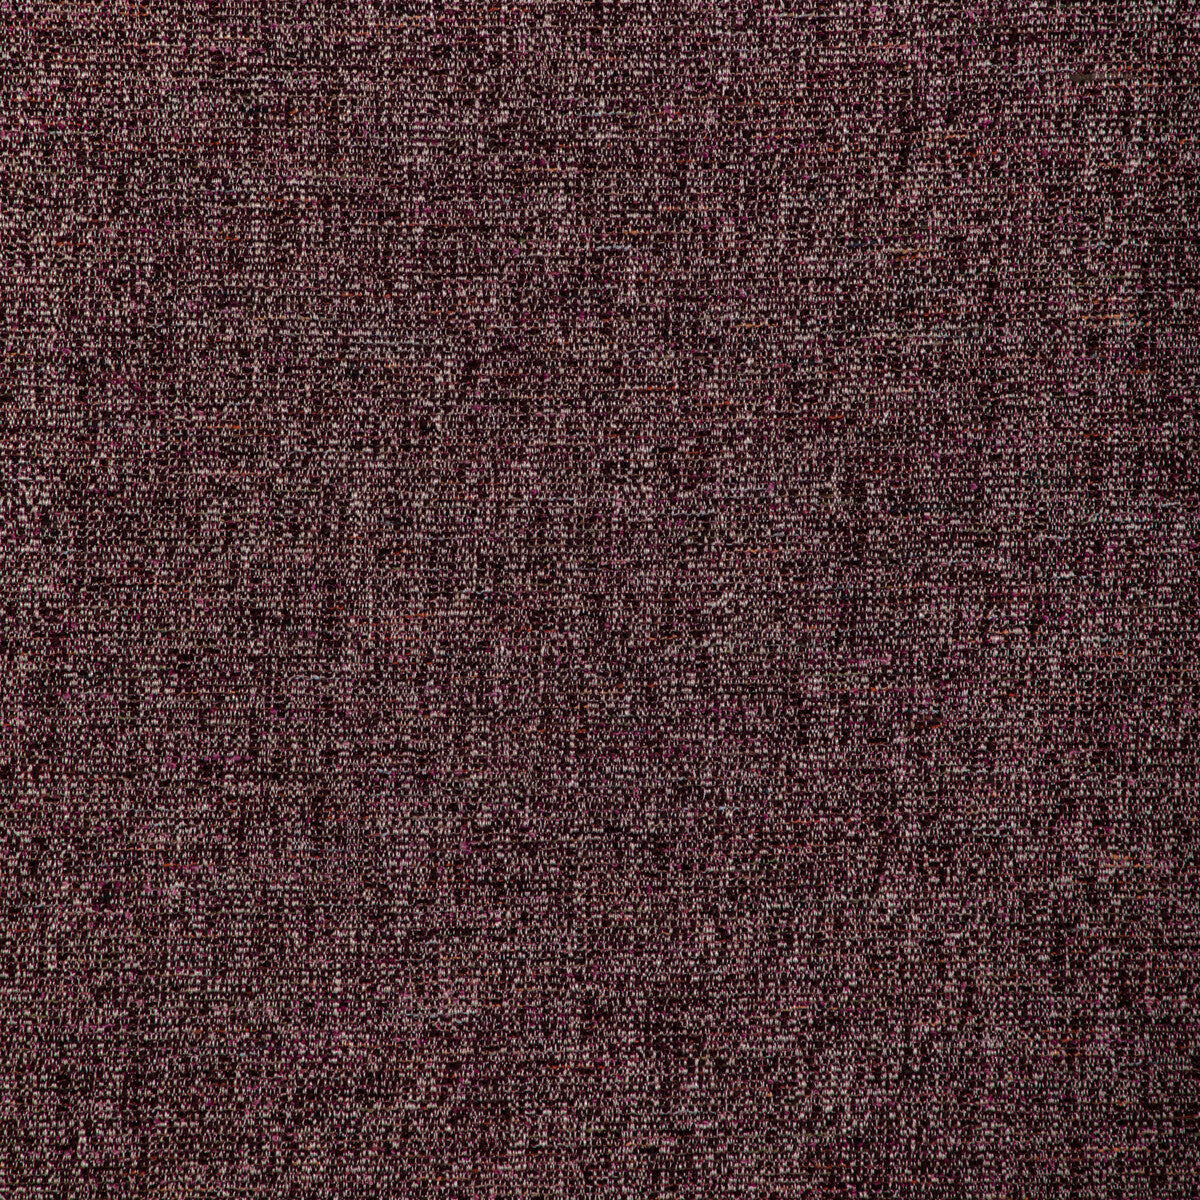 Mireille Texture fabric in aubergine color - pattern 8023128.910.0 - by Brunschwig &amp; Fils in the Arles Weaves collection